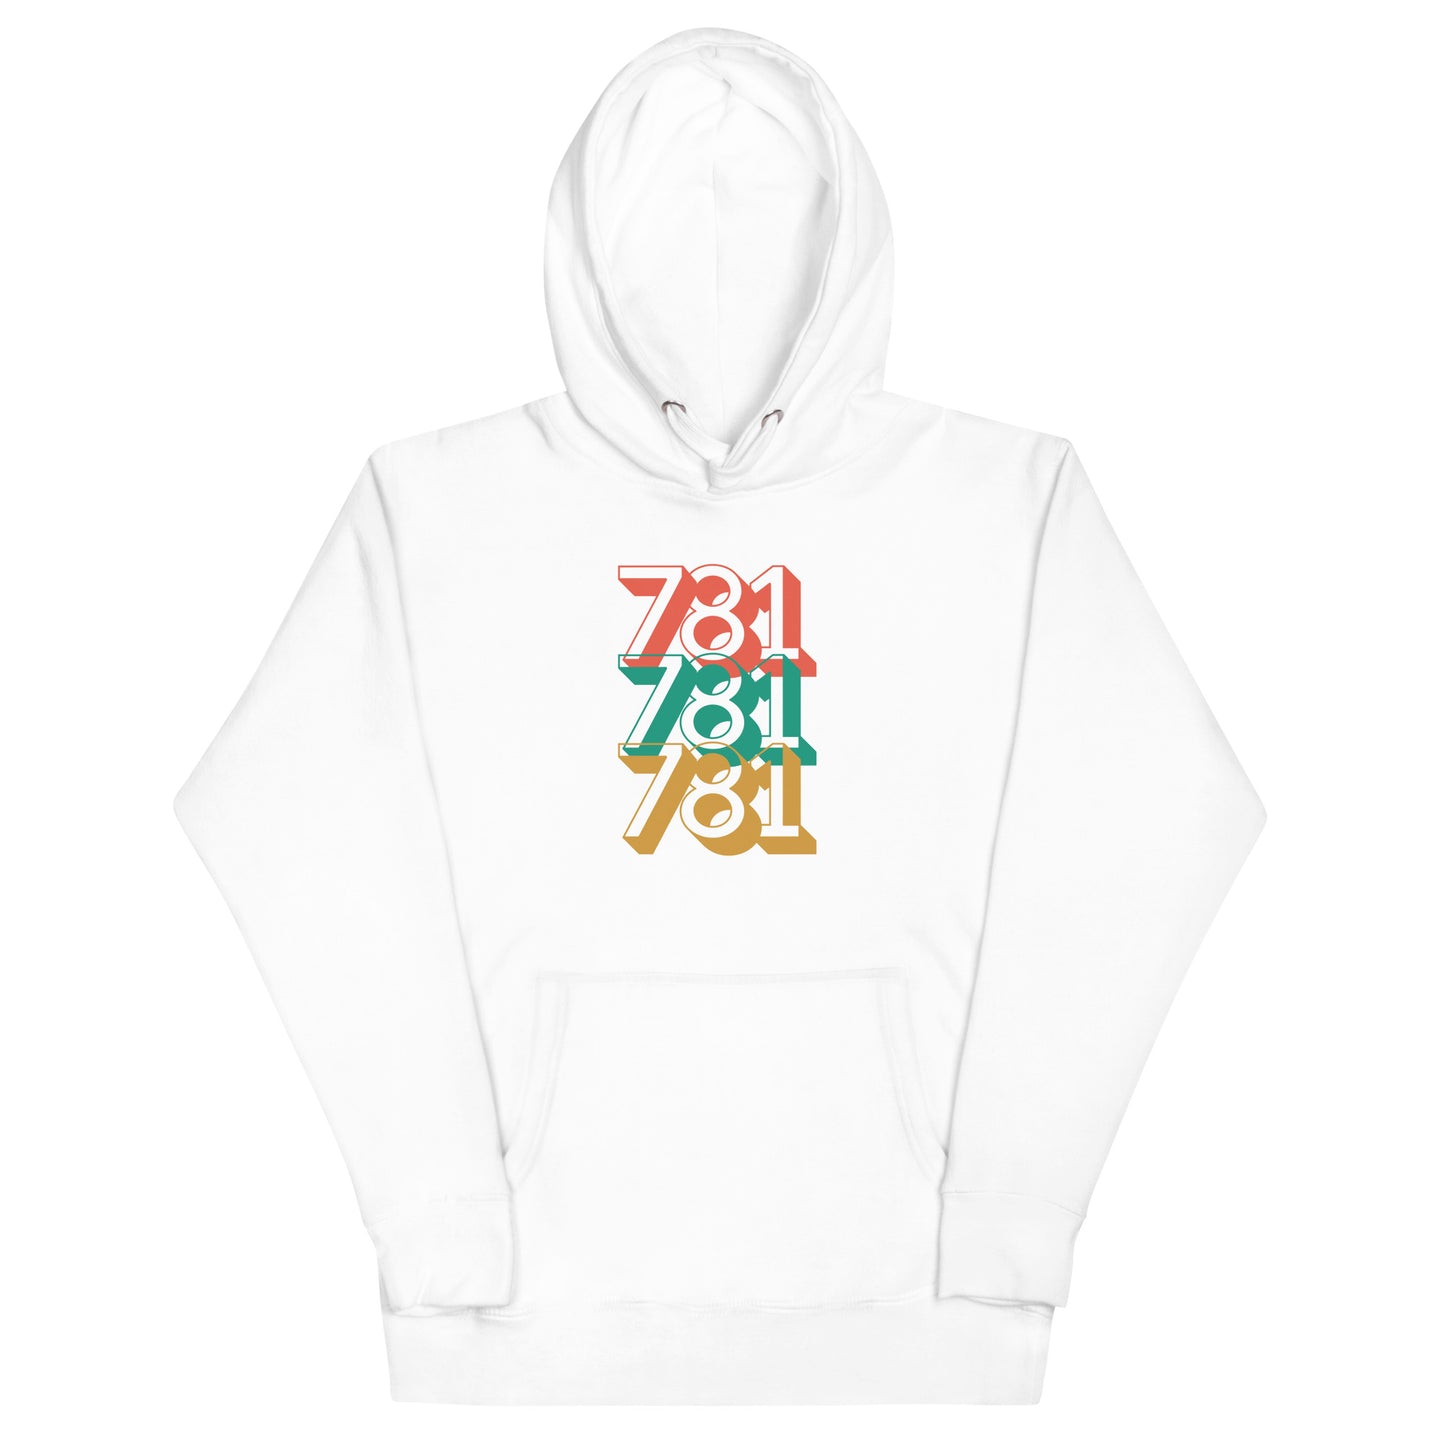 white hoodie with three 781s in red green and yellow